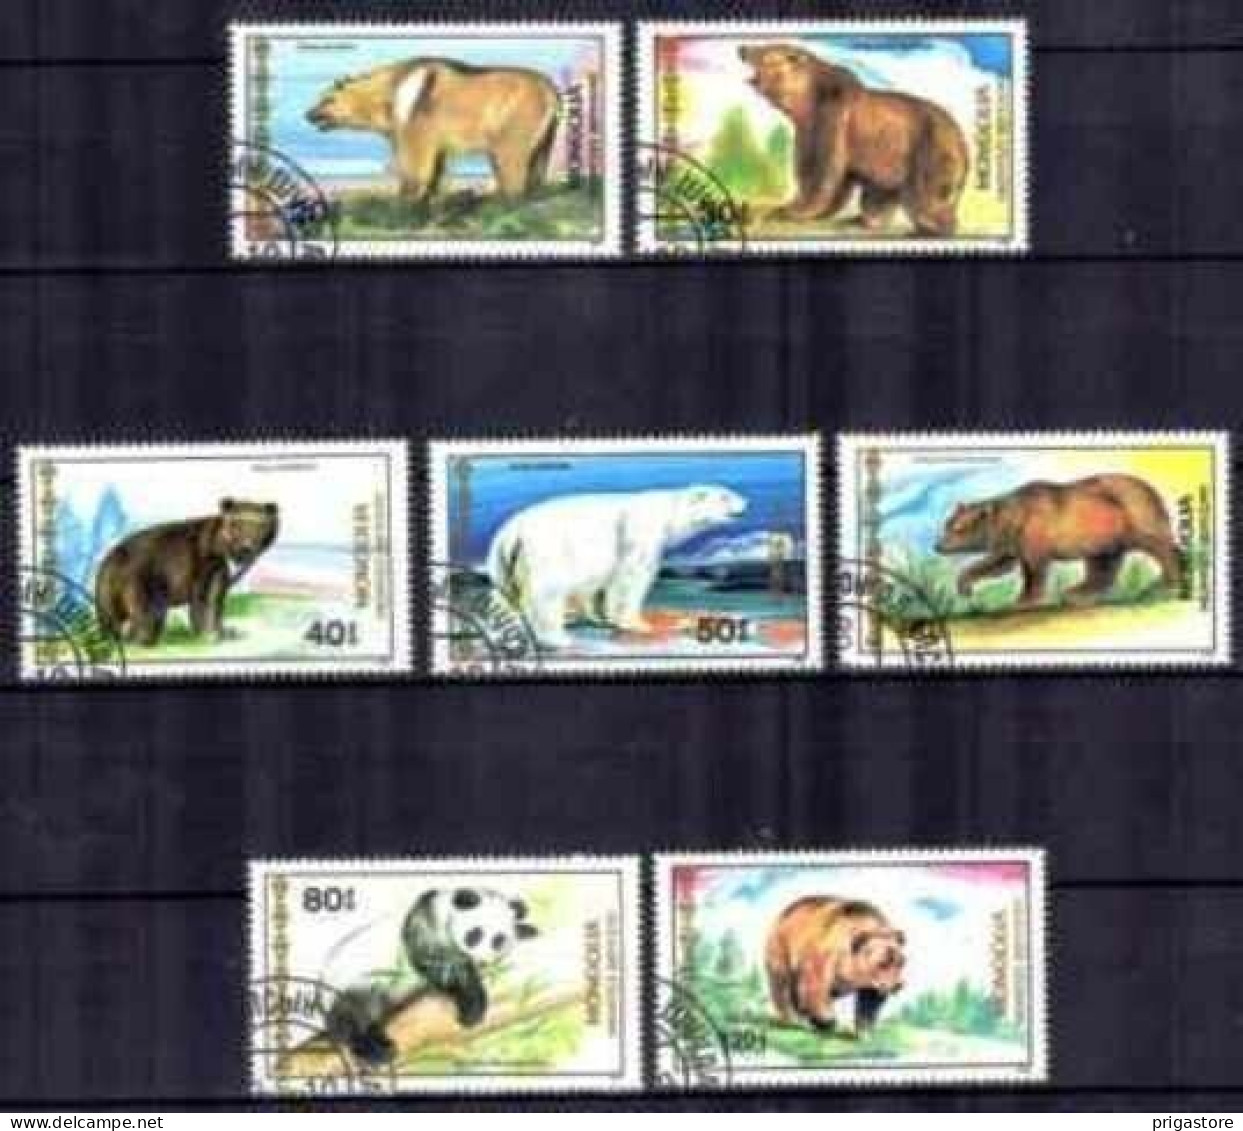 Animaux Ours Mongolie 1989 (108) Yvert N° 1650 à 1656 Oblitéré Used - Osos